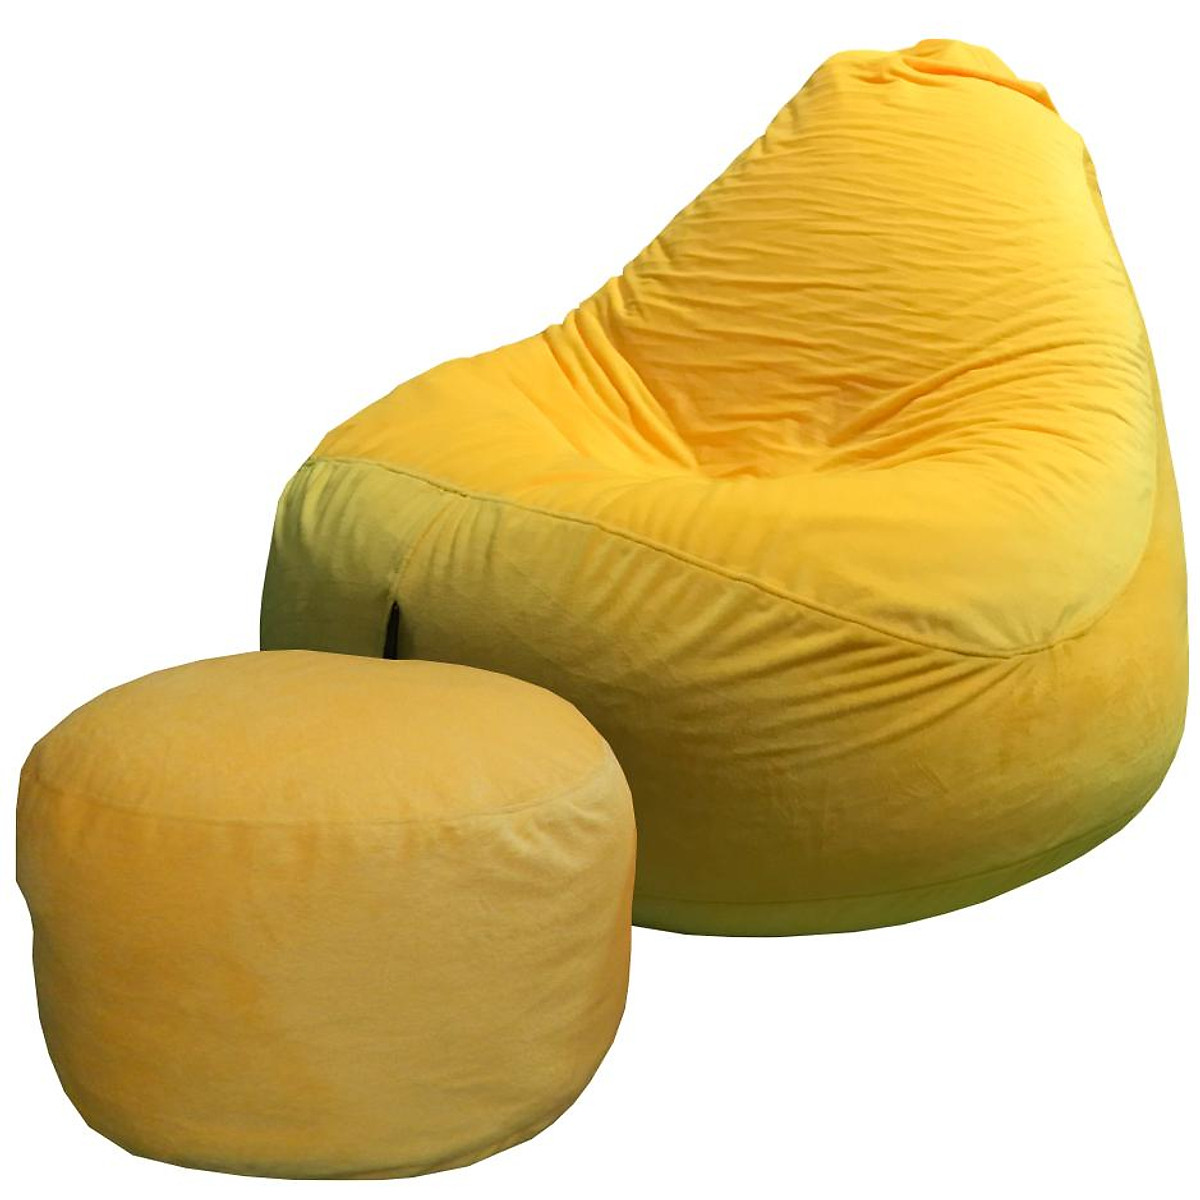 Bean Bag Lazy Sofa Cover Petal-shaped Bean Bag Covers (No Filler) Washable  Soft Cotton Linen Large Beanbag with Lining Cover Plush Toys Storage,yellow  : Amazon.co.uk: Home & Kitchen